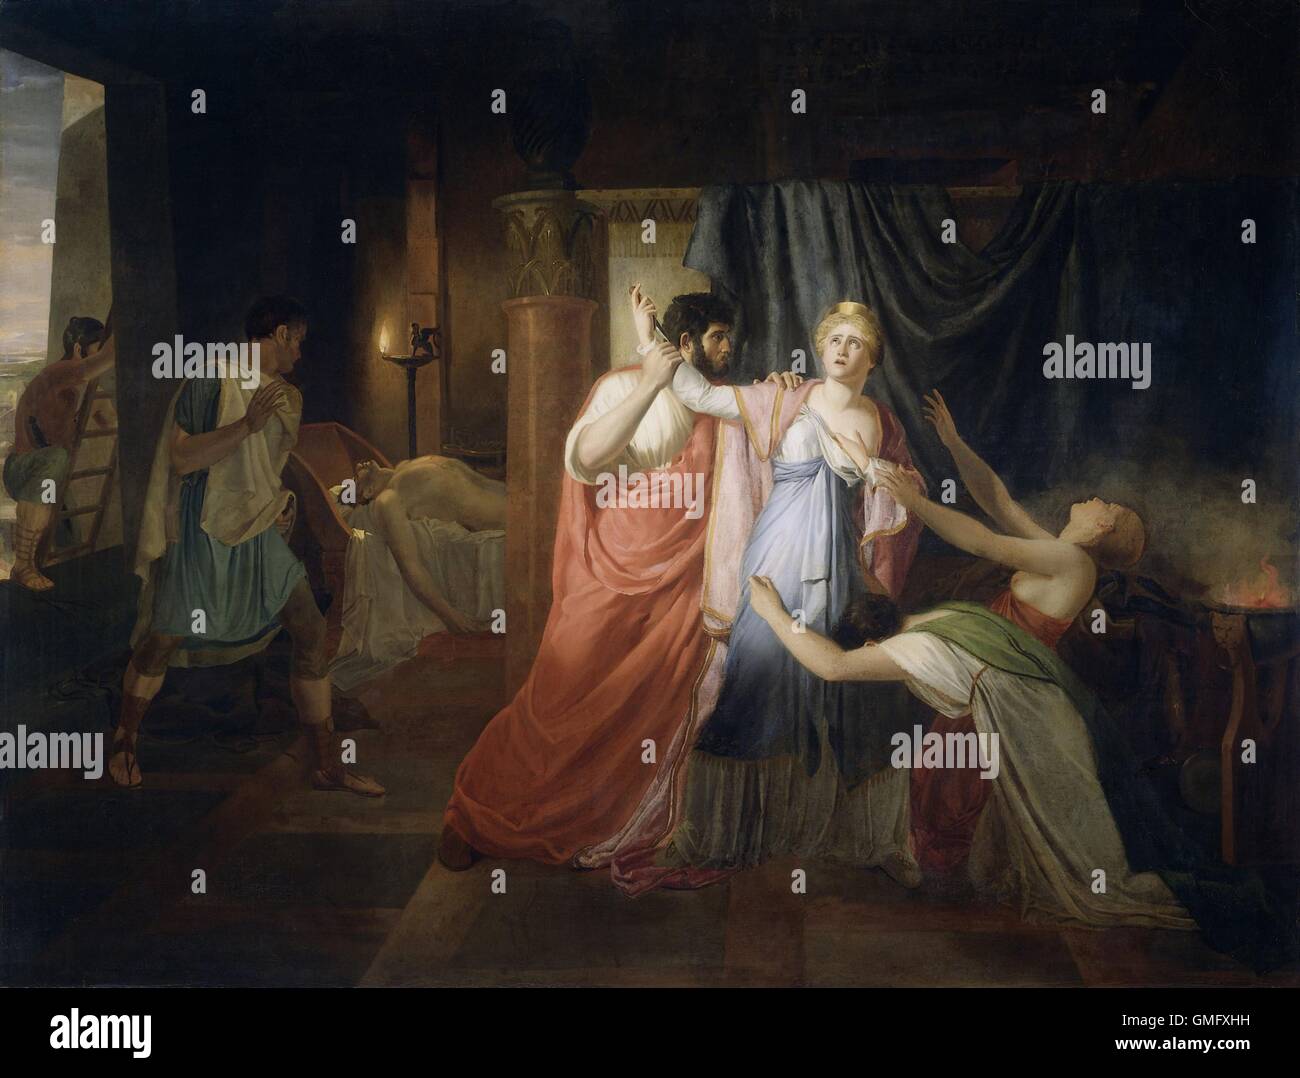 Proculeius Preventing Cleopatra from Stabbing Herself, by Joannes Echarius Carolus Alberti, 1810, Dutch painting, oil on canvas. In the background is Mark Anthony, who Cleopatra assumes is dead (BSLOC 2016 2 242) Stock Photo